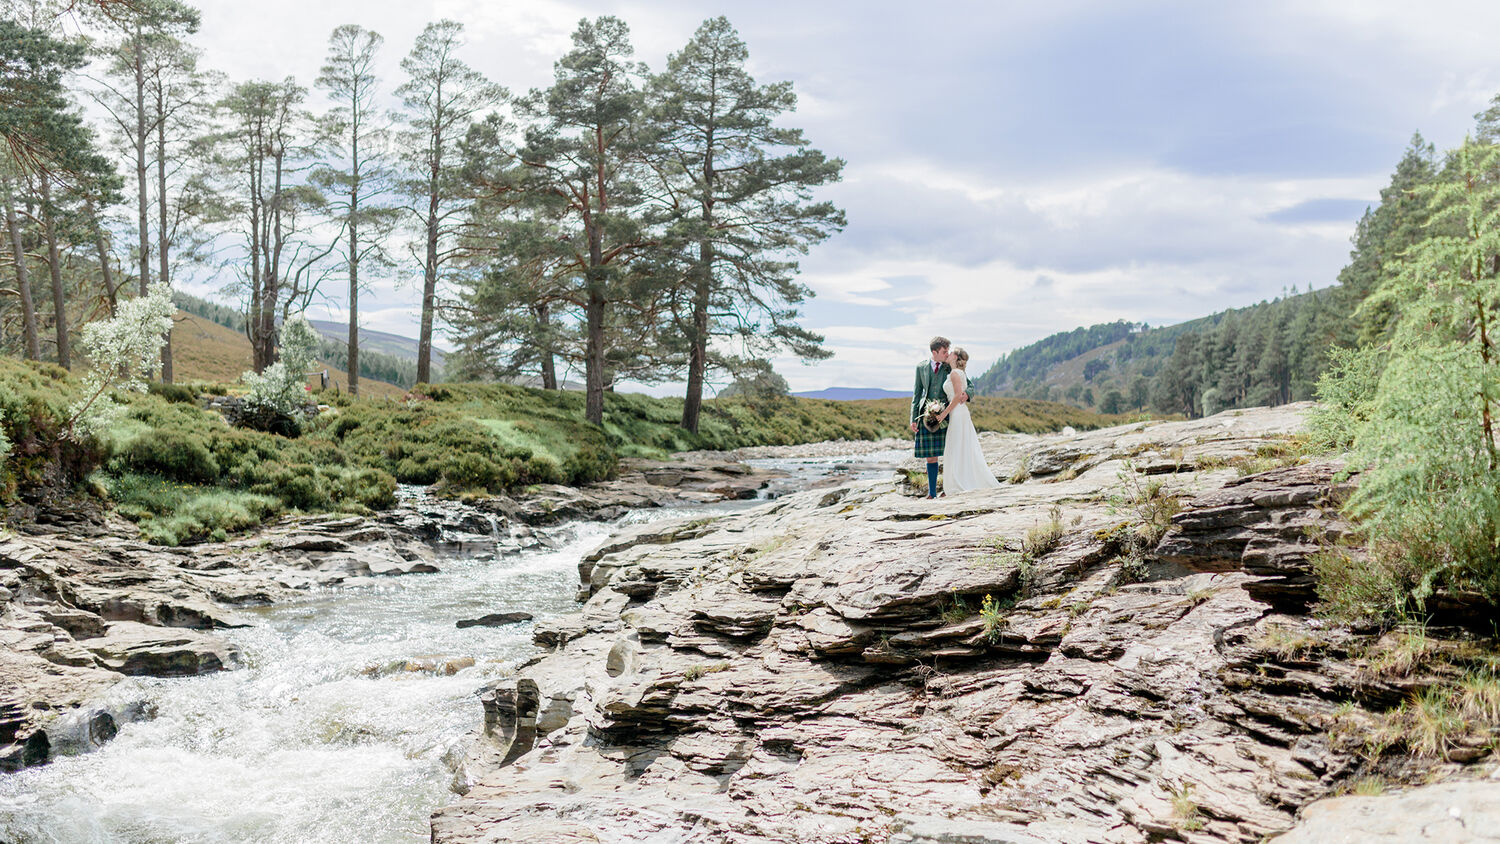 A bride and groom stand on smooth rocks beside a gushing river. Pine trees grow on the far bank and mountains can be seen in the distance.